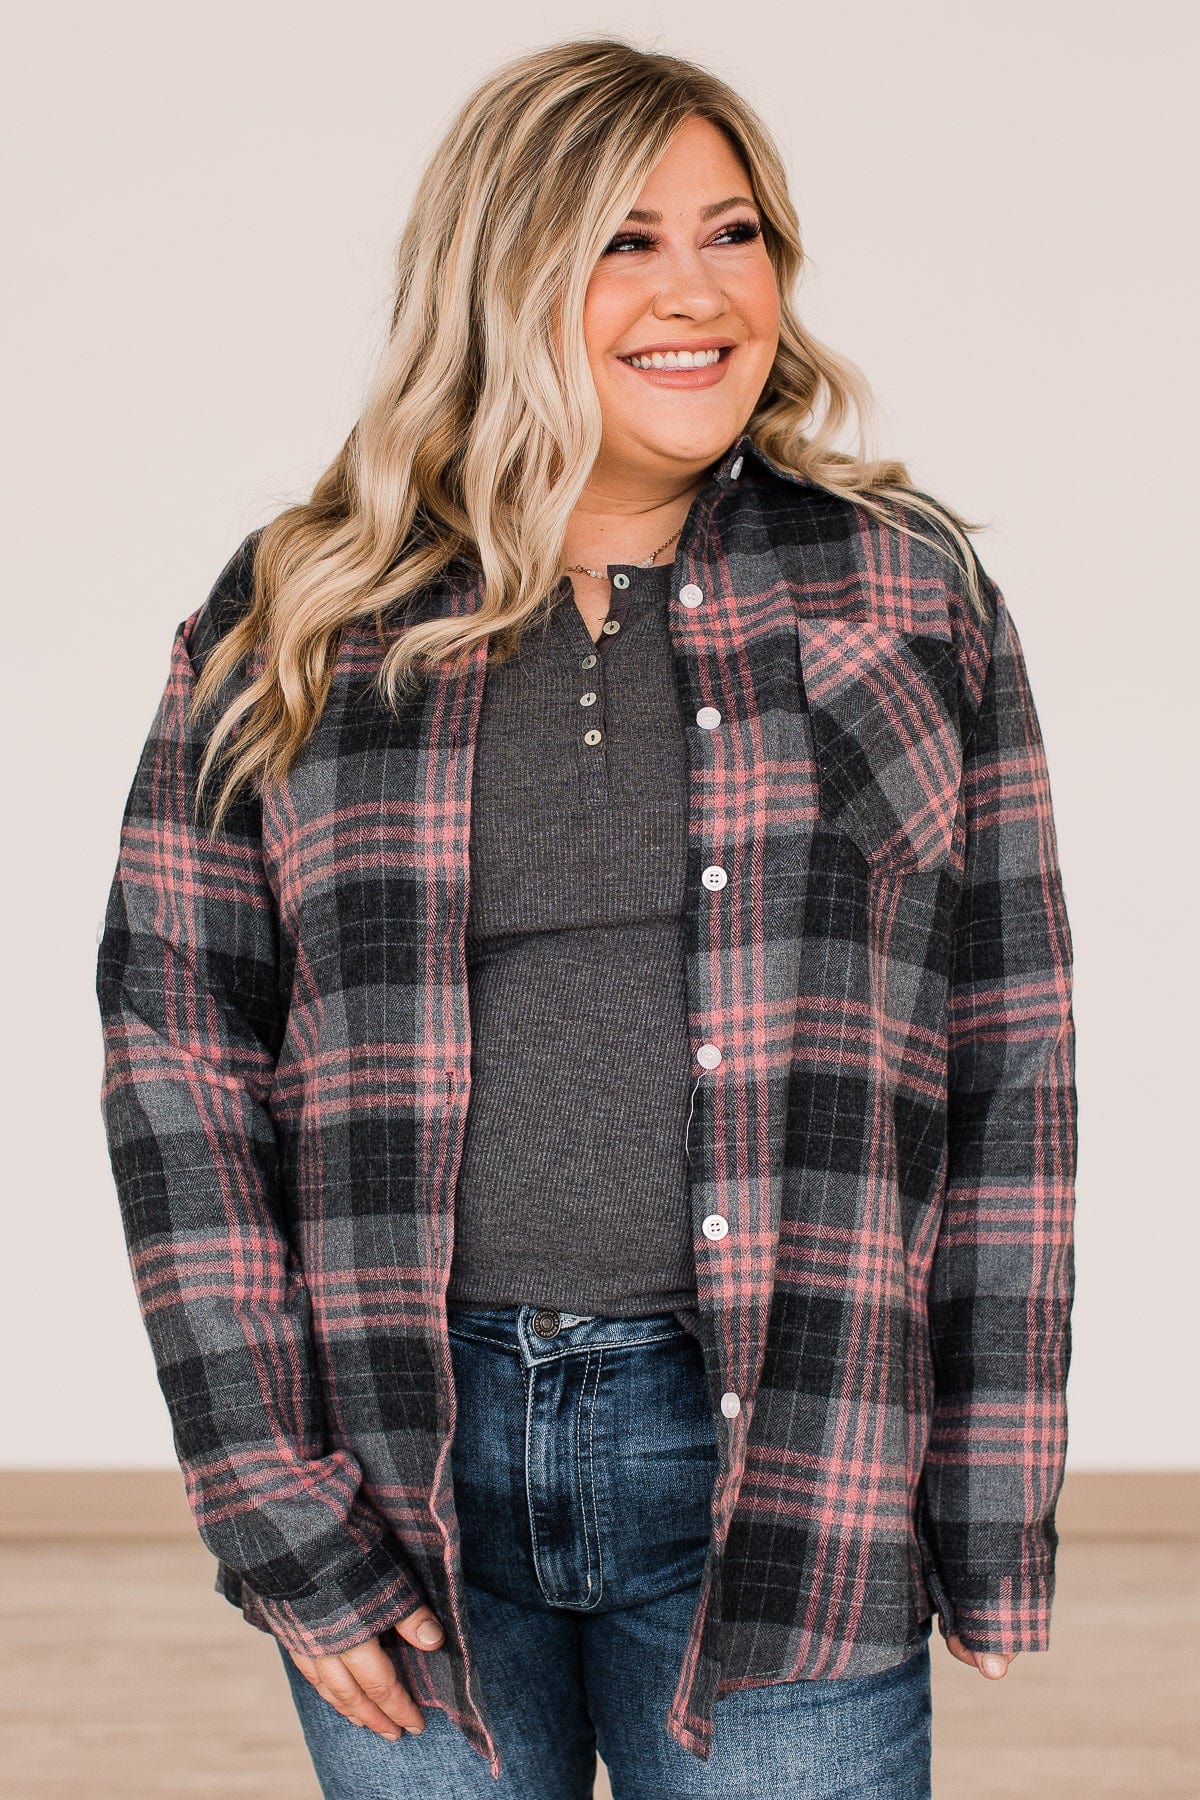 Falling For Your Smile Plaid Flannel- Grey & Pink